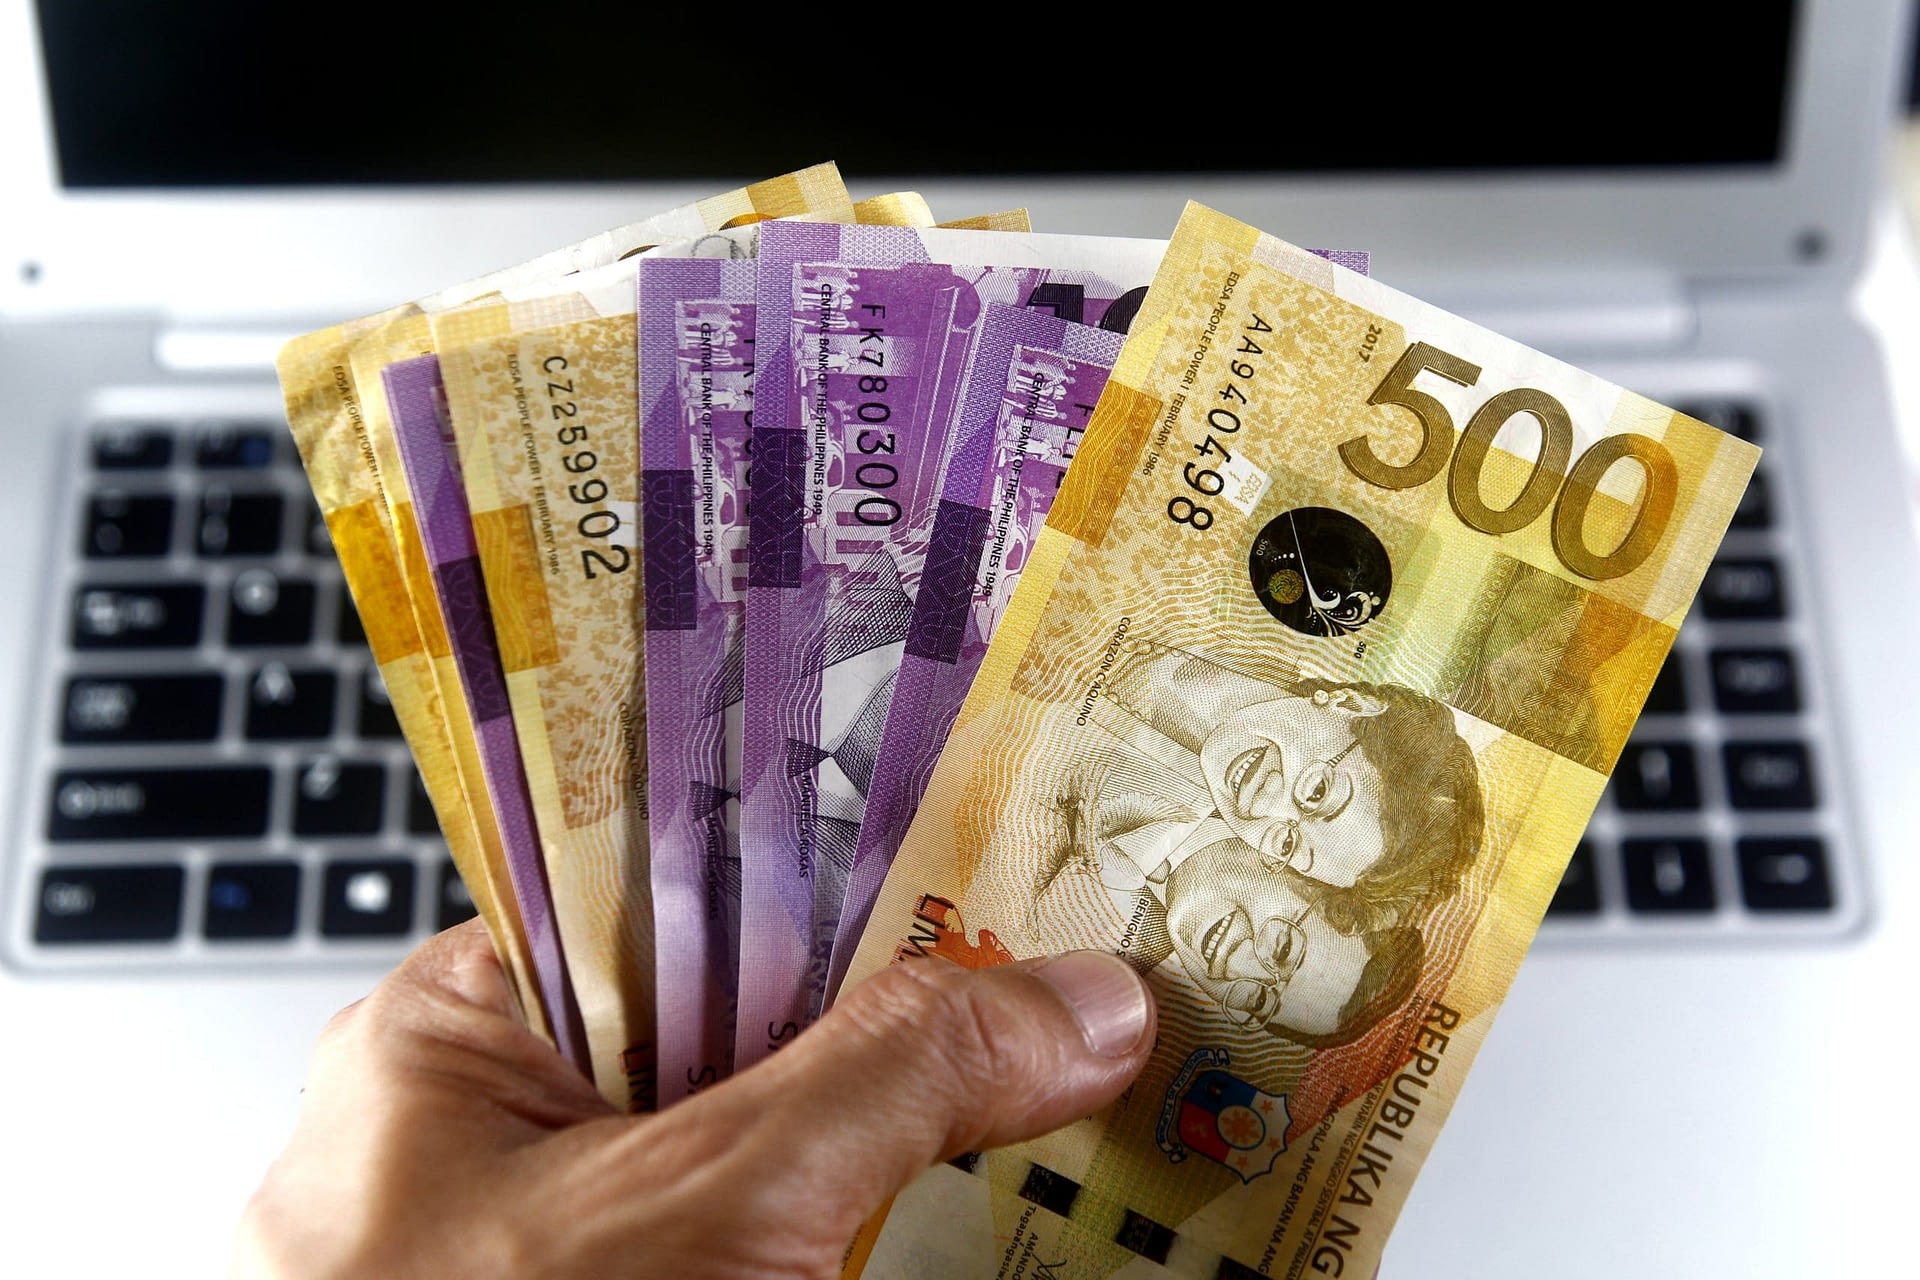 Online Lending Apps in the Philippines reported to have unfair debt collection practices